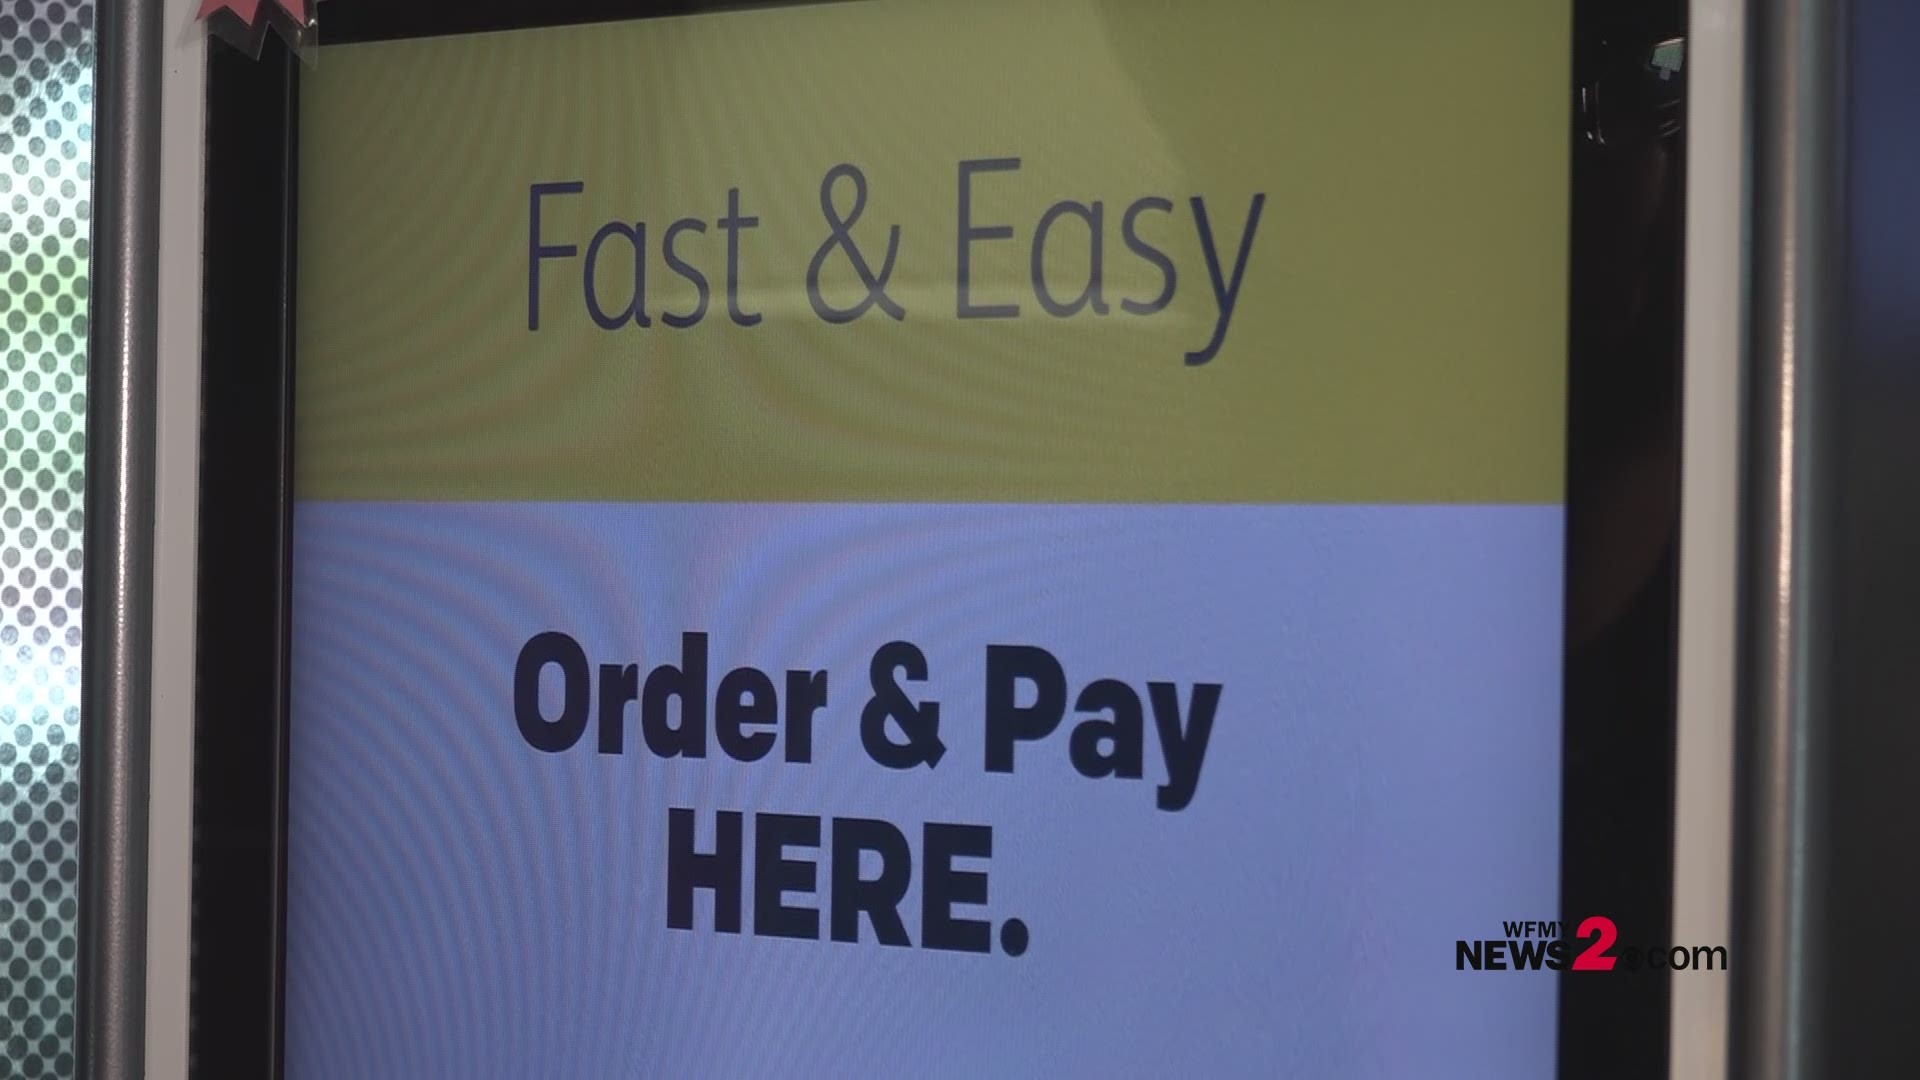 McDonald's has started adding touch-screen ordering kiosks to thousands of stores nationwide to supplement in-store employees.